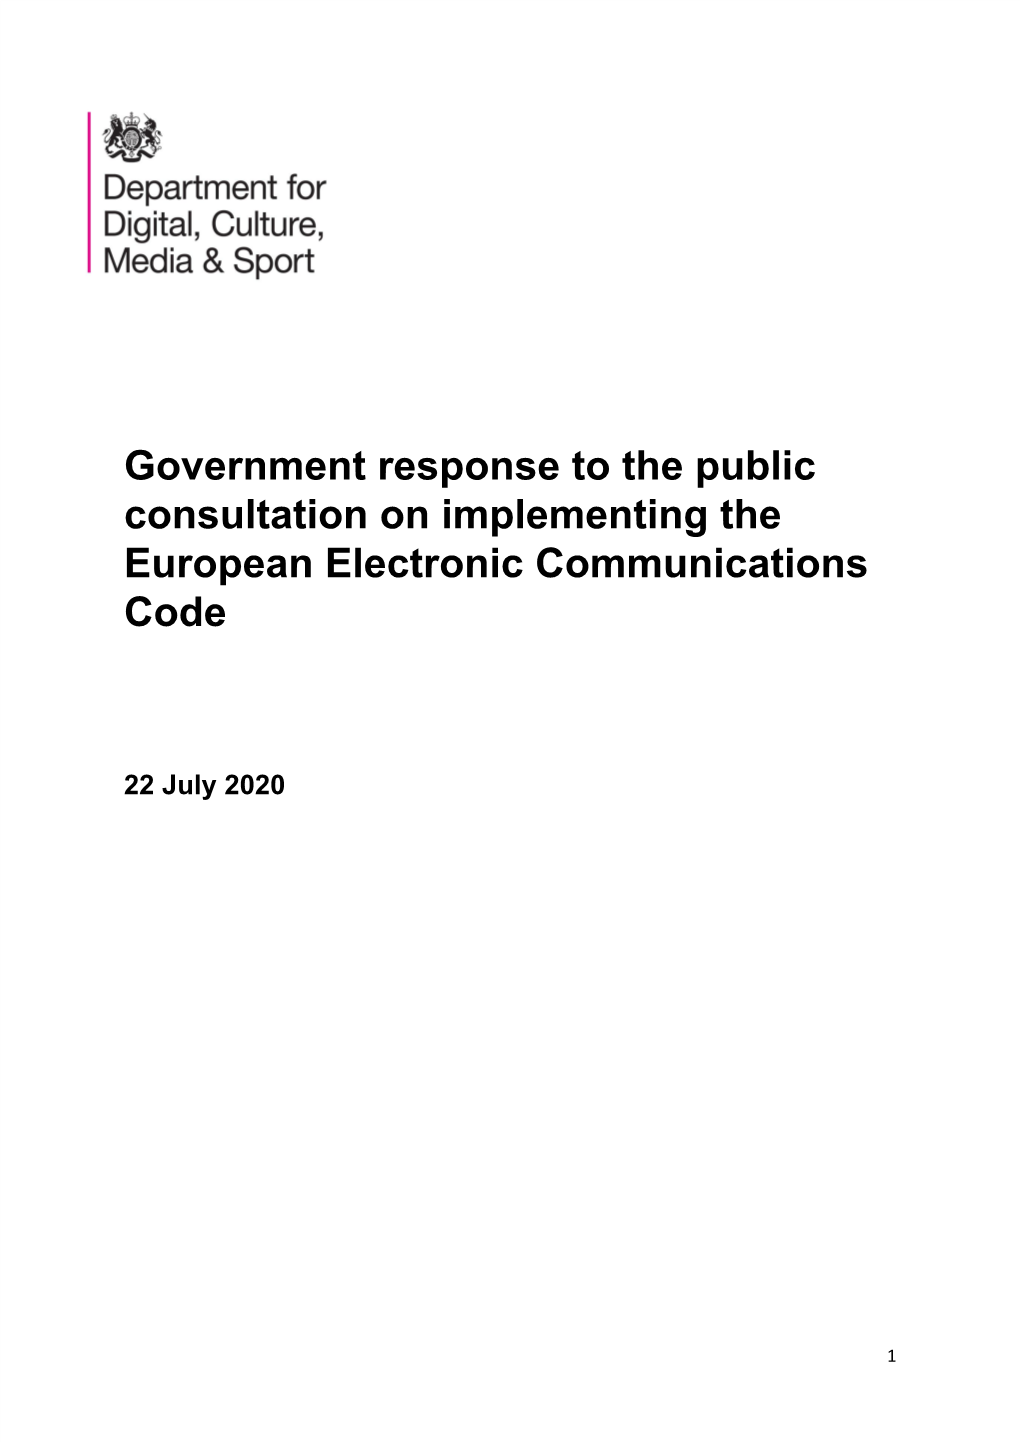 Government Response to the Public Consultation on Implementing the European Electronic Communications Code